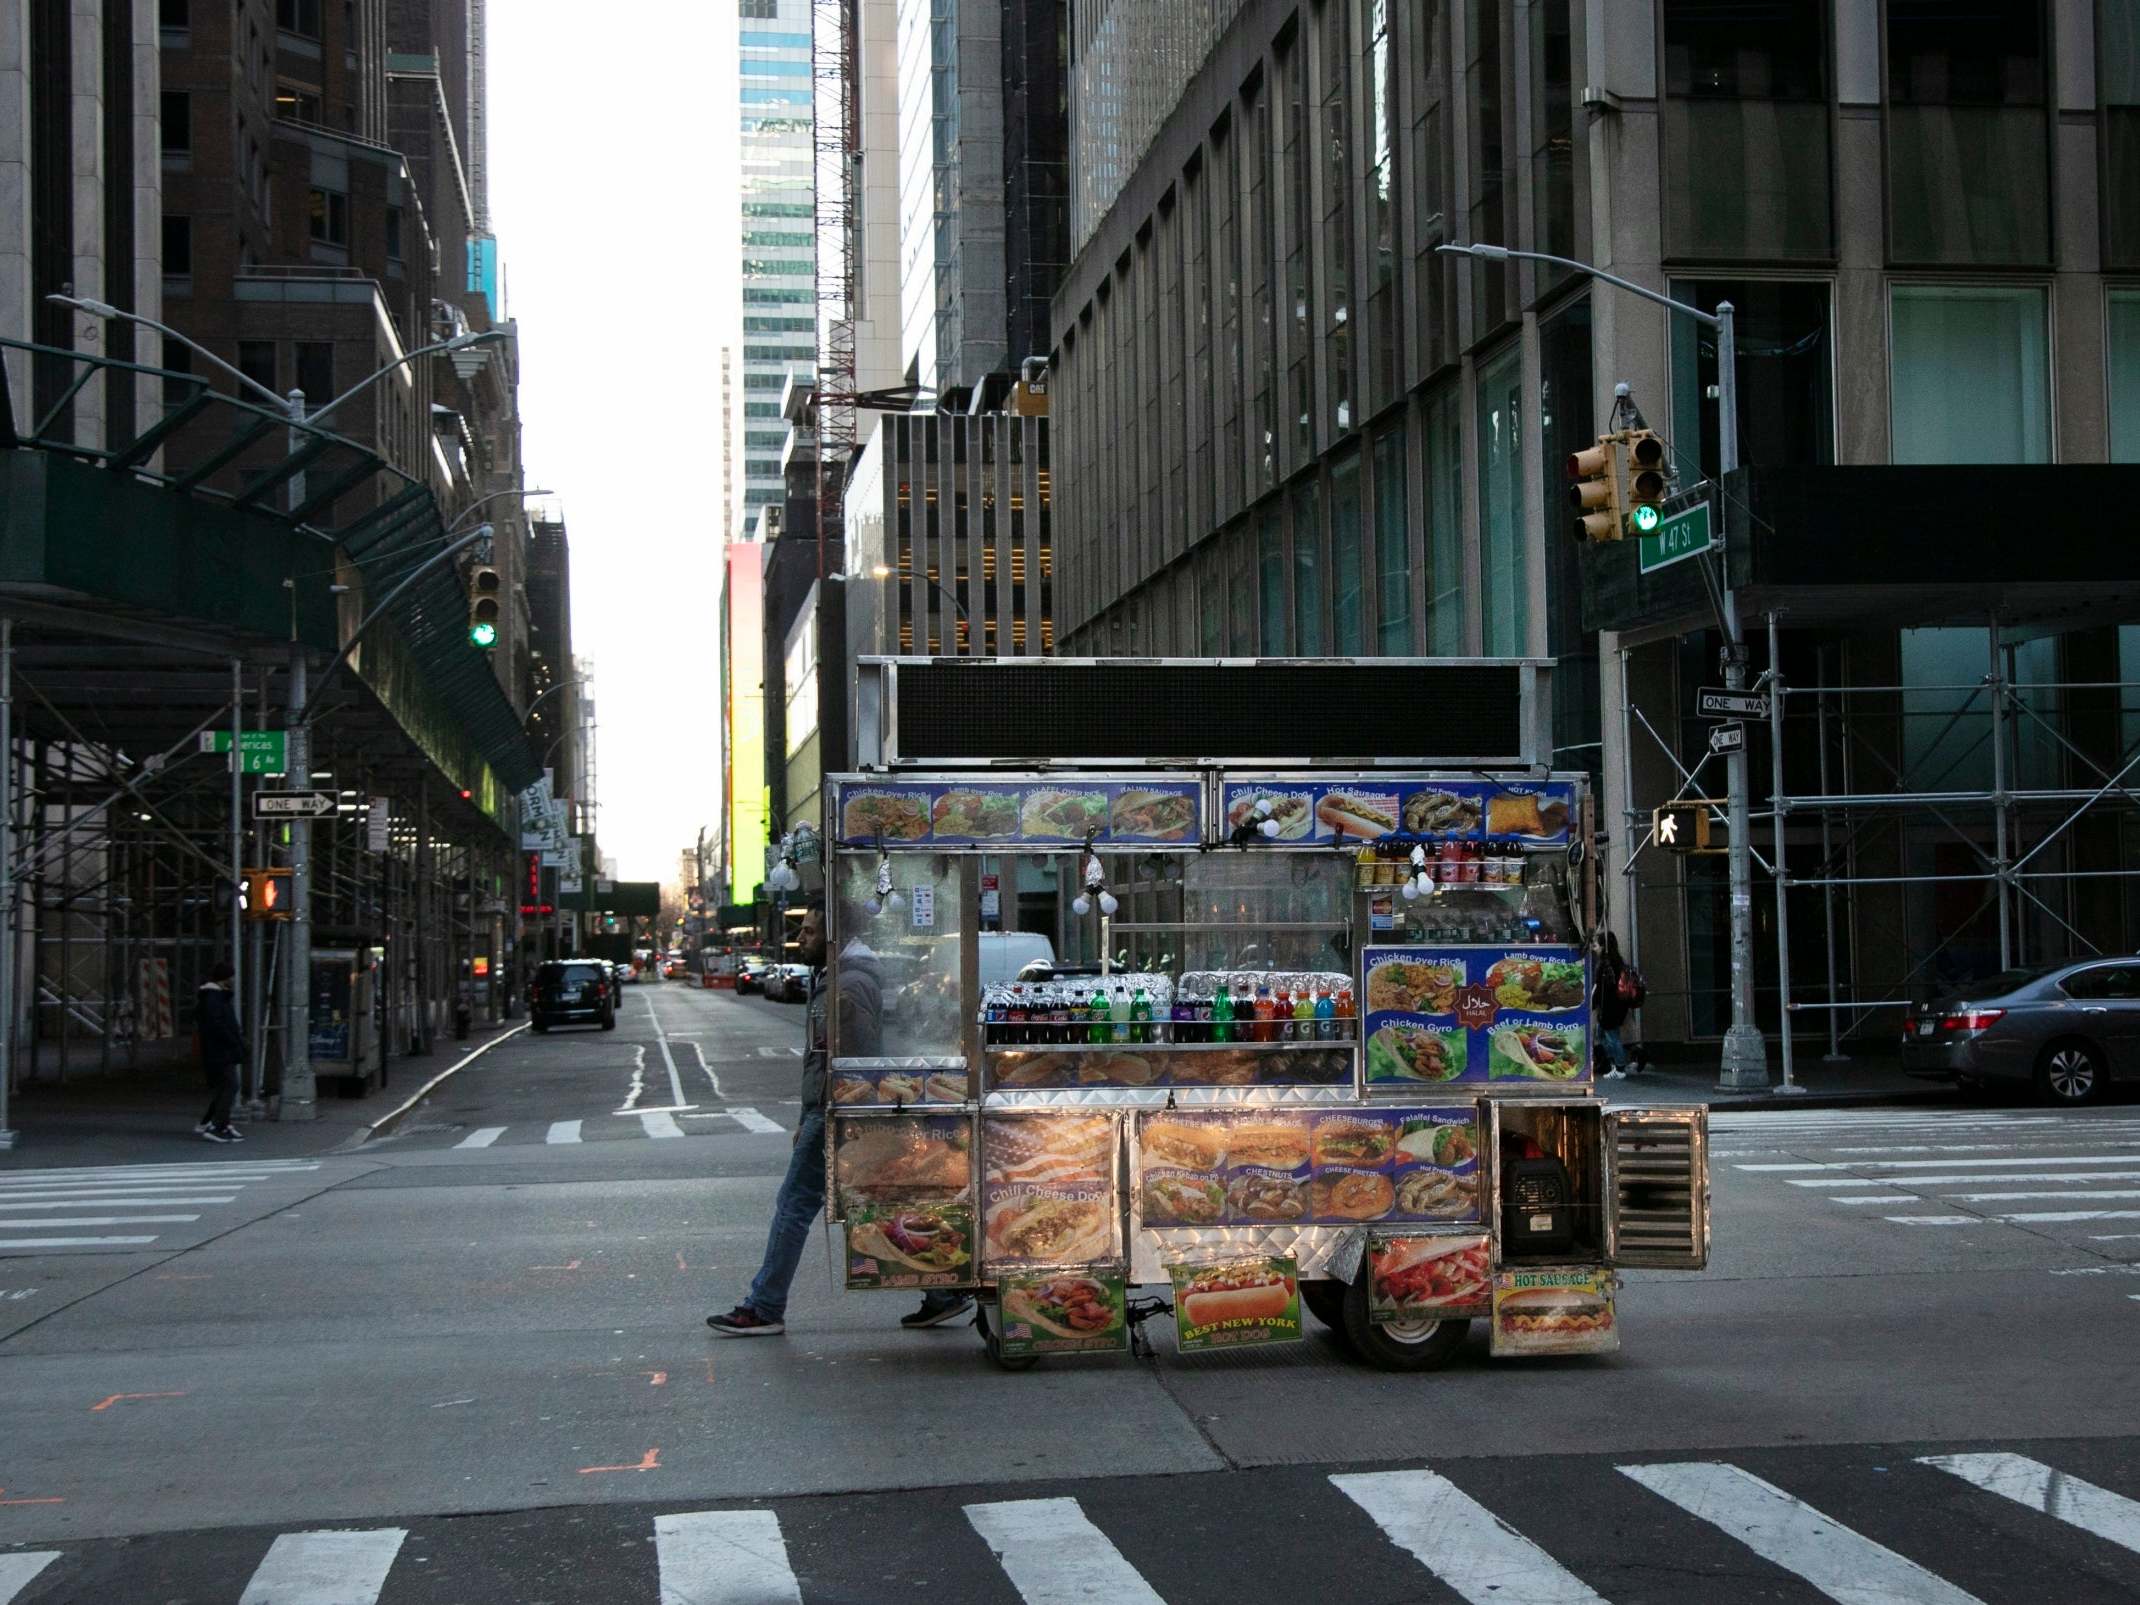 A food truck vendor pushes his cart down an empty street near Times Square in New York, on Sunday, March 15, 2020.